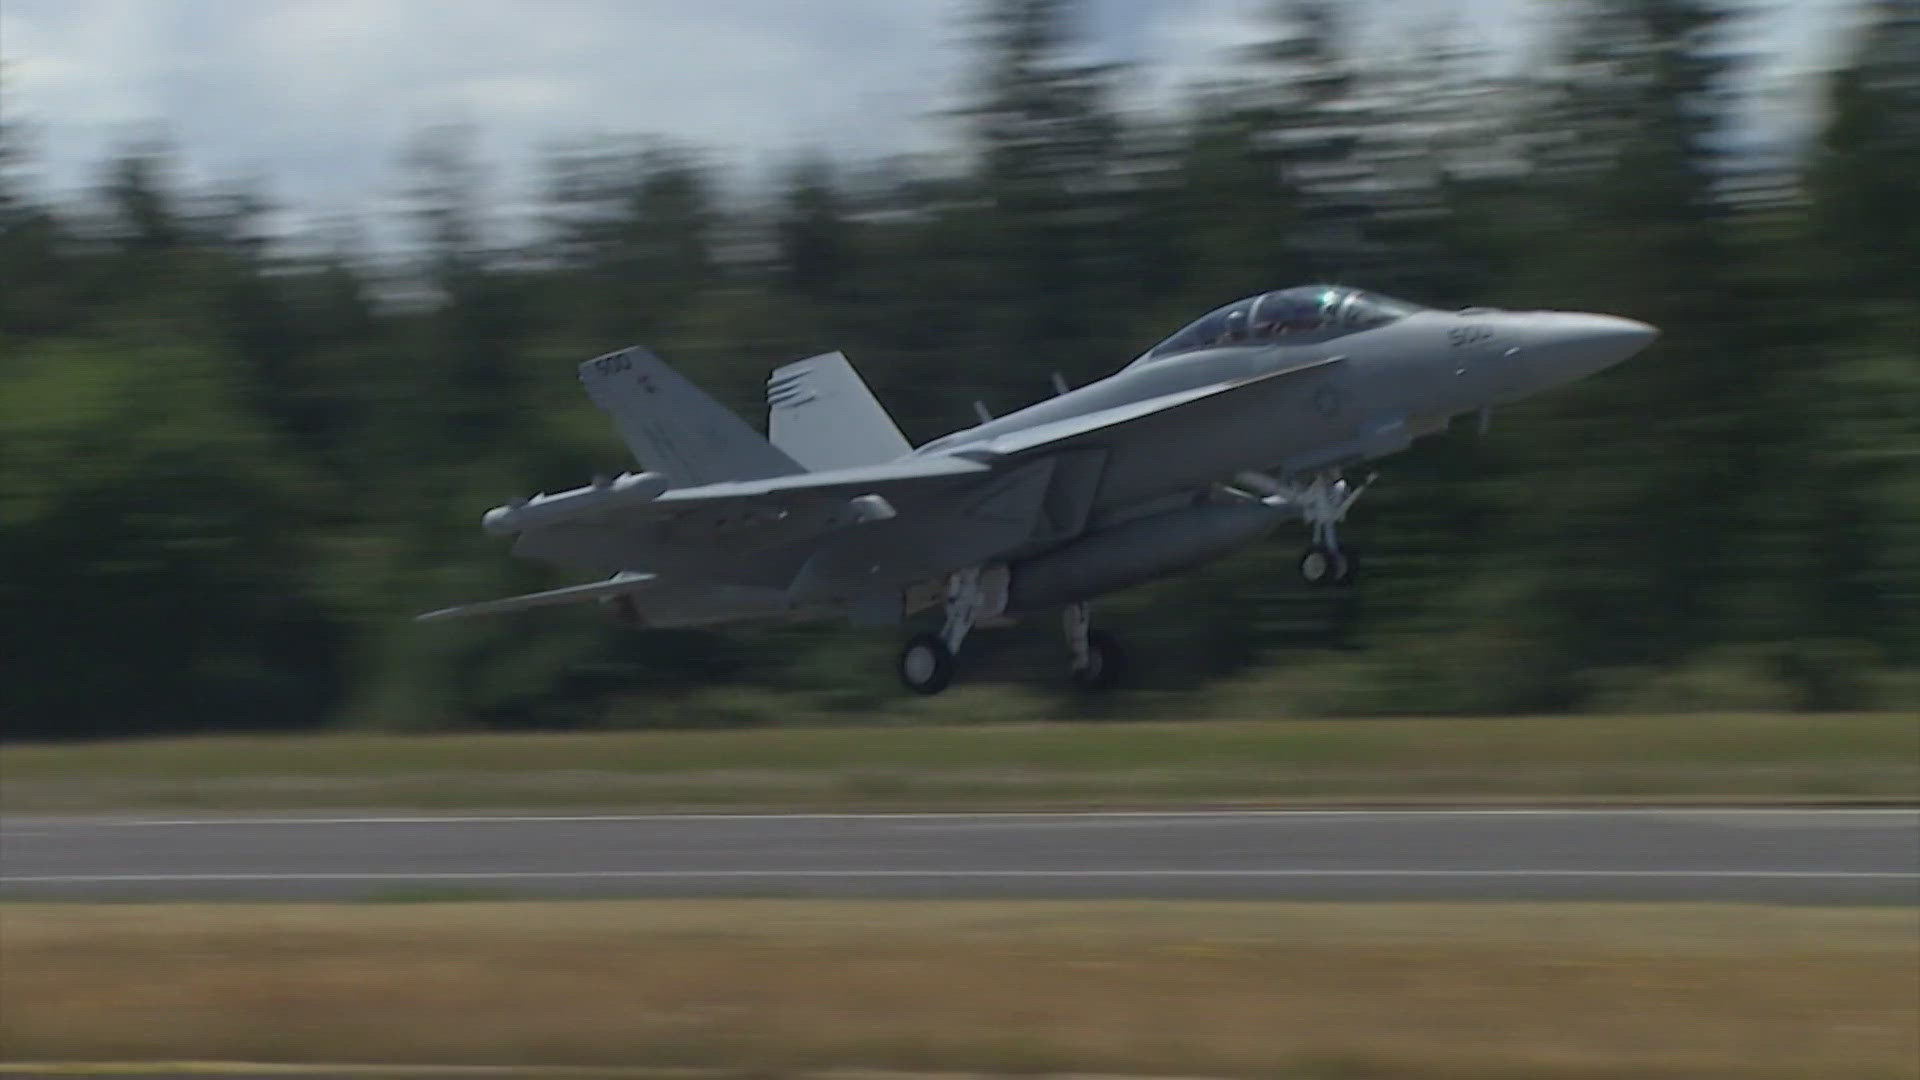 Neighbors on Whidbey Island have been battling noise from the Navy's "Growler" jets for more than a decade.